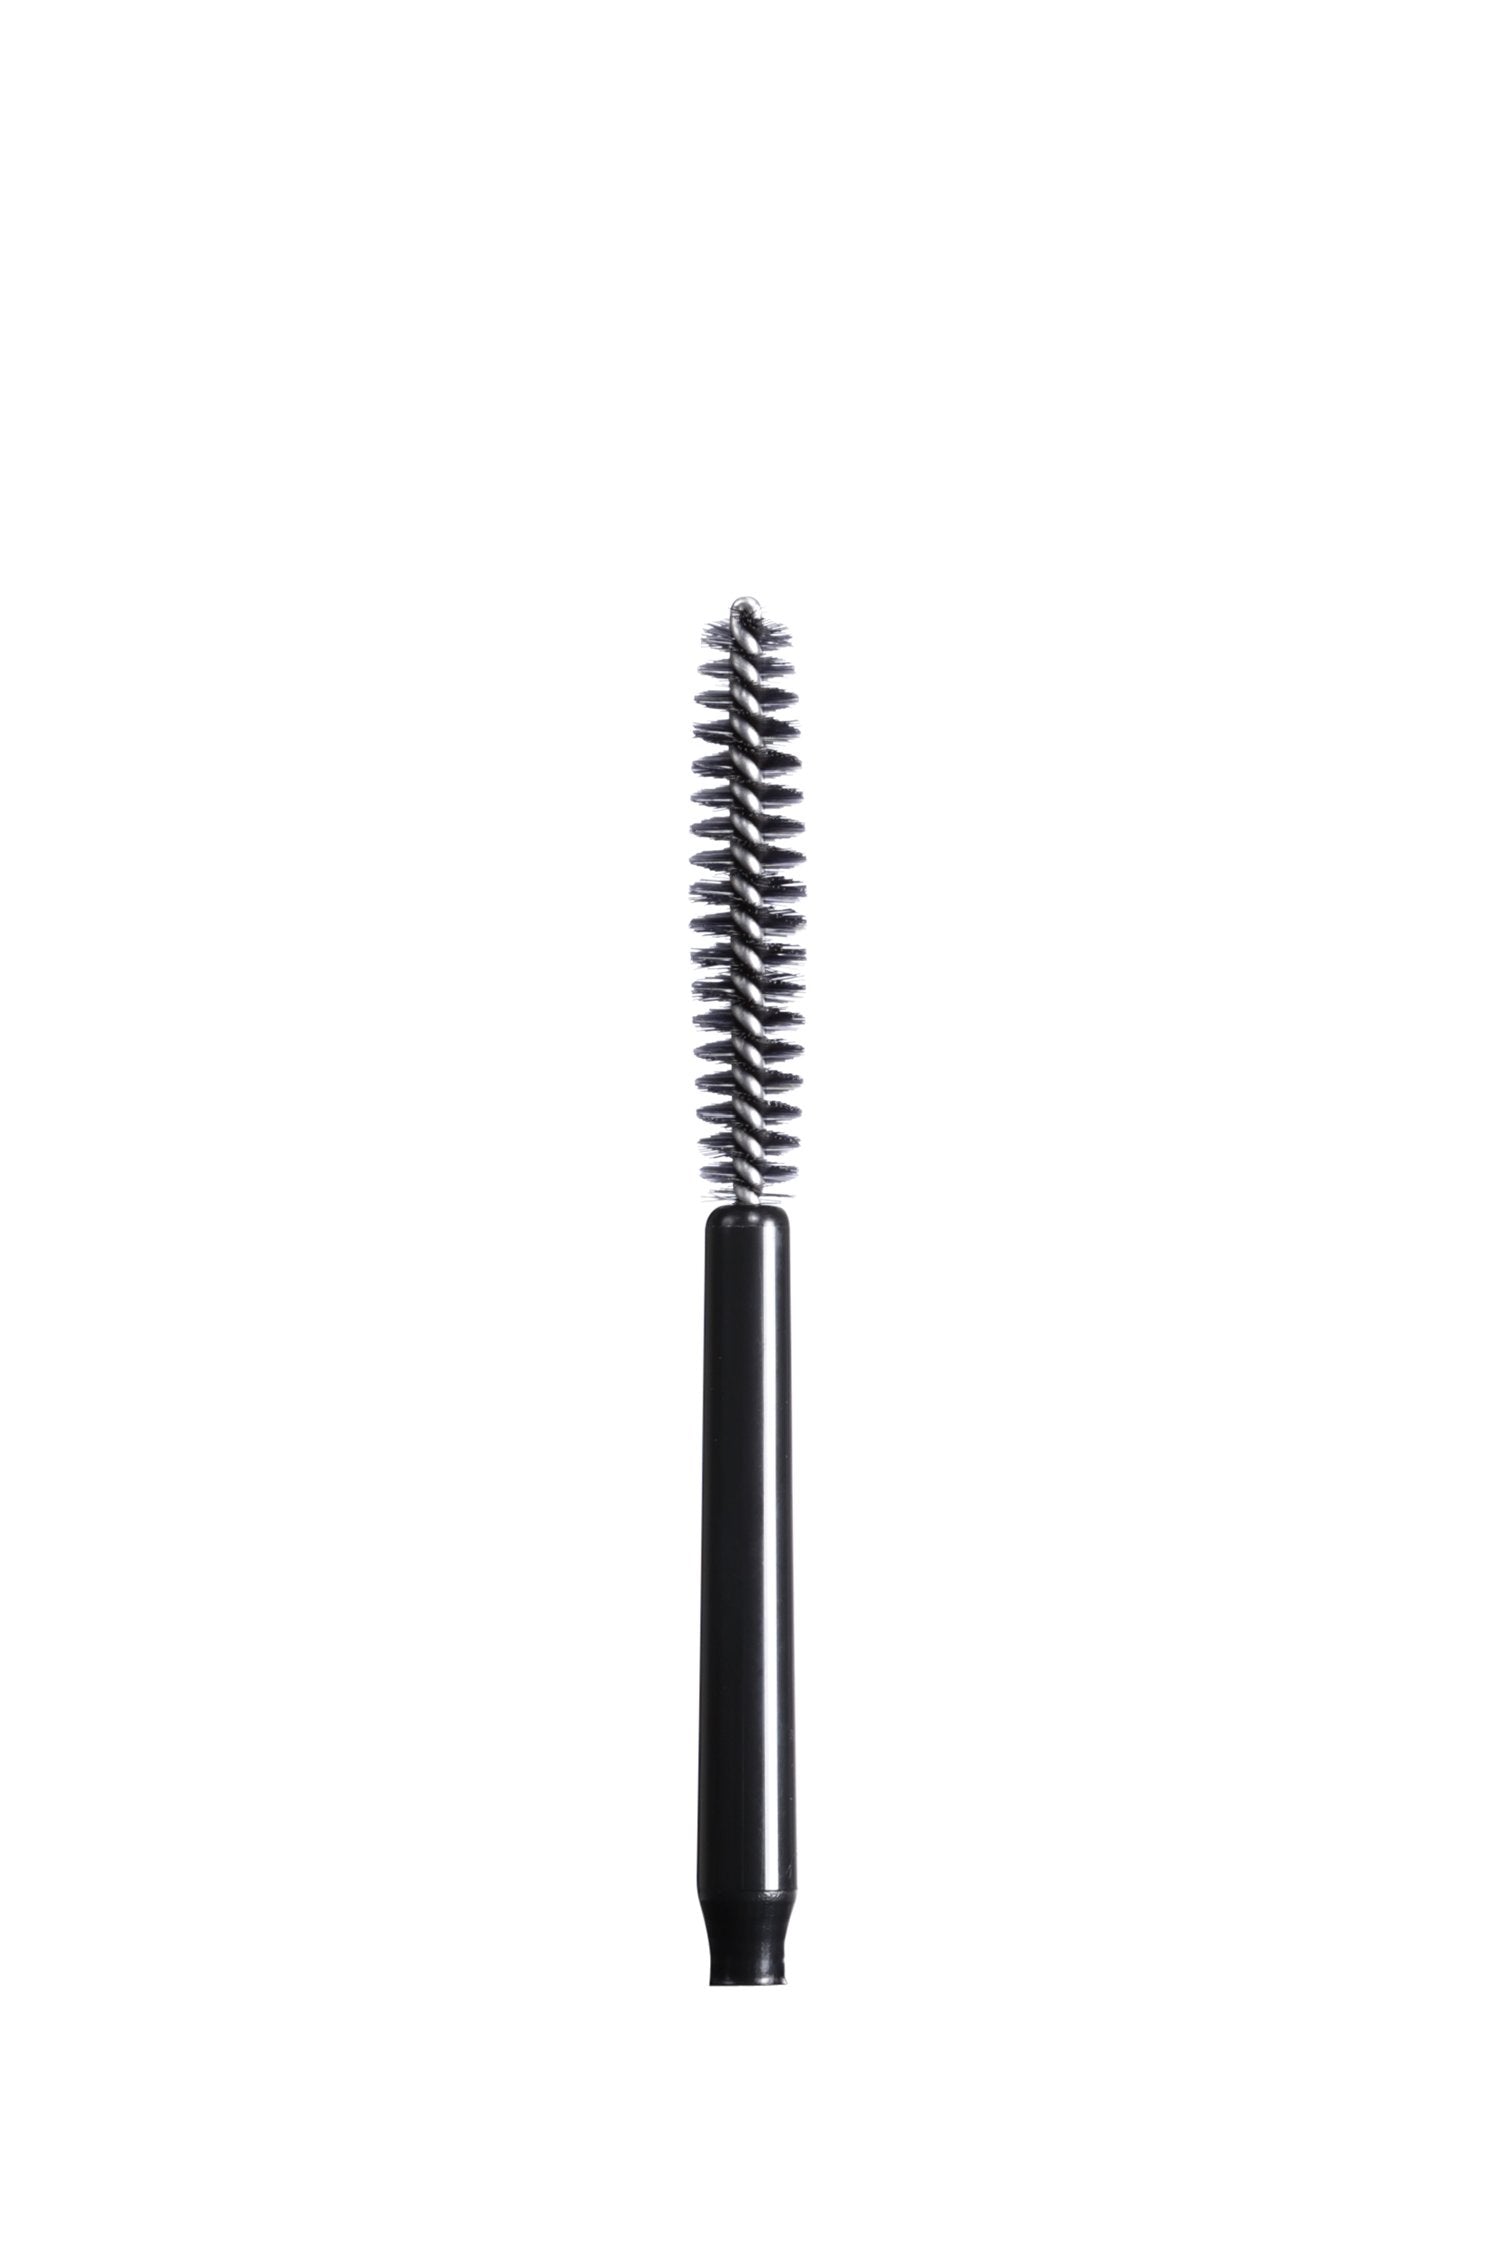 Anna Sui Waterproof Mascara applicator to easily reach, root and base of lashes. 